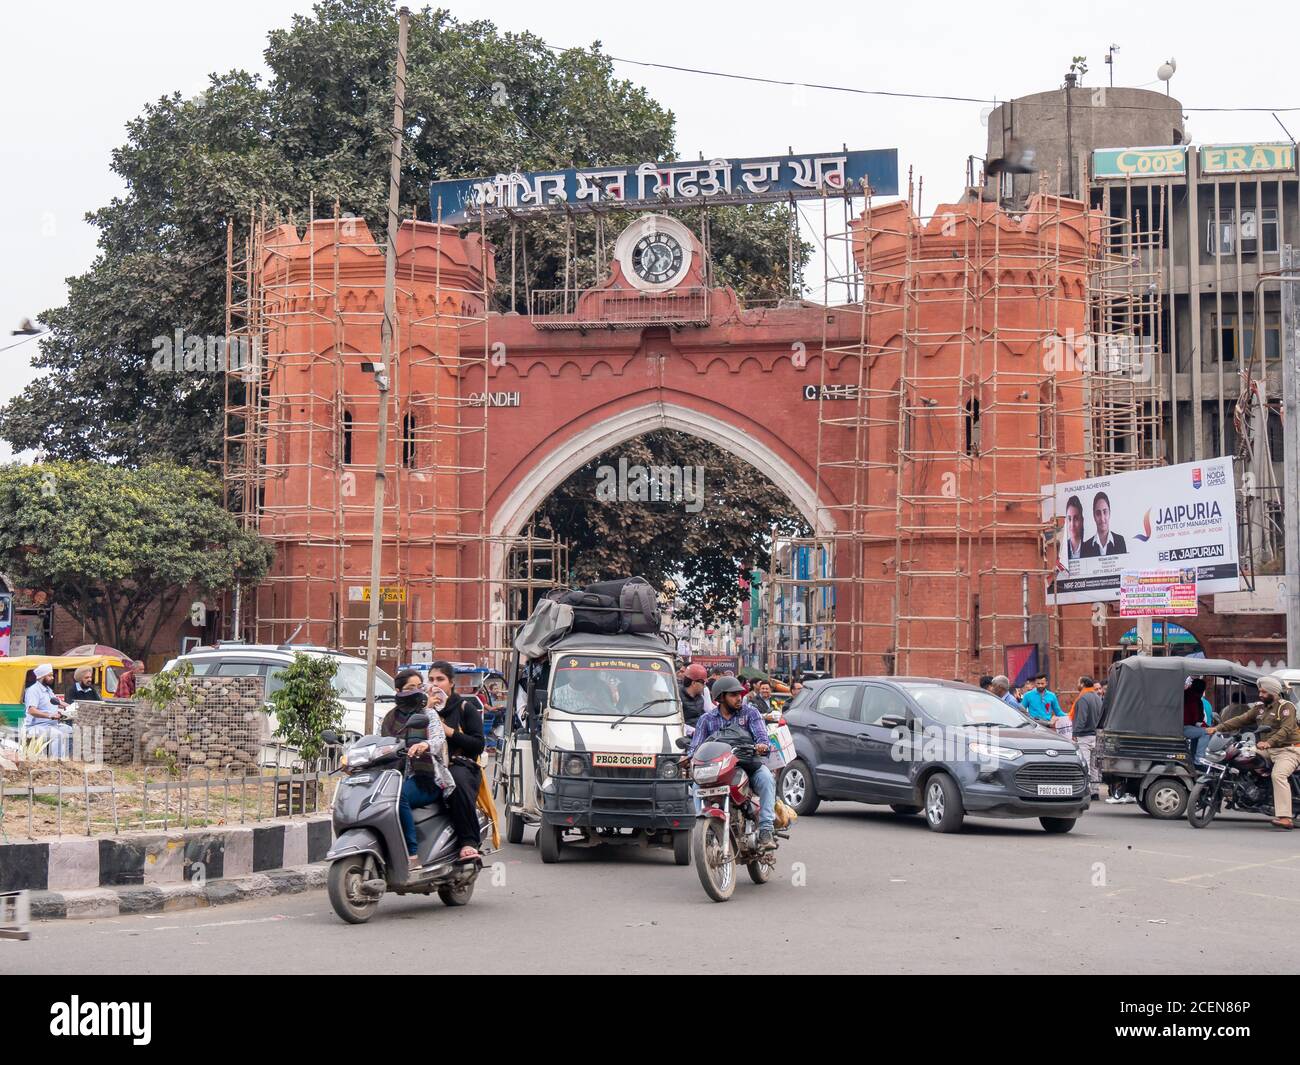 AMRITSAR, INDIA - MARCH 18, 2019: a wide shot of a gate to hall bazaar in amritsar Stock Photo